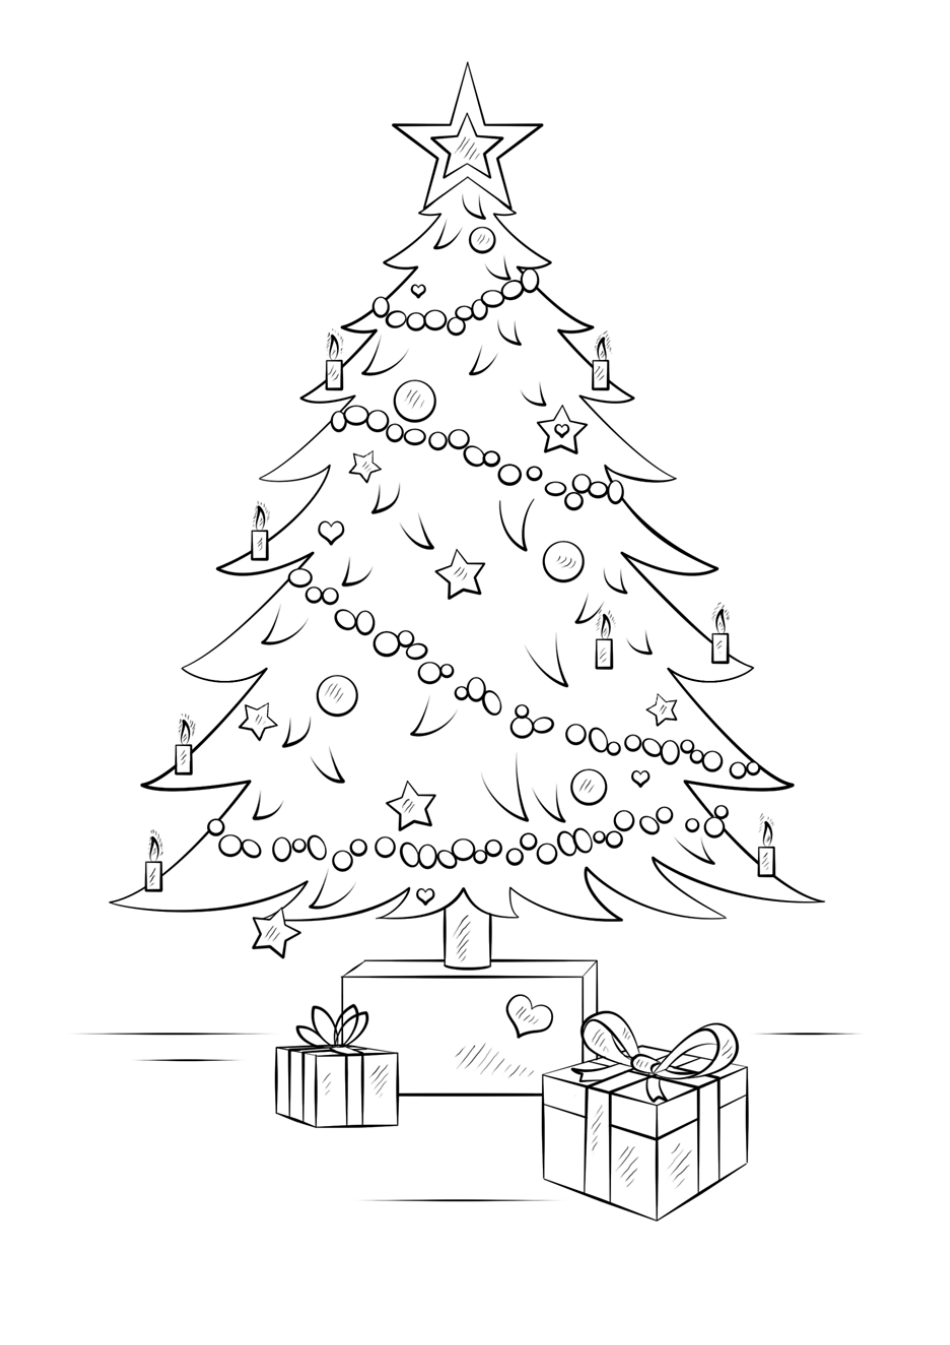 Christmas Tree Coloring Page with Gifts